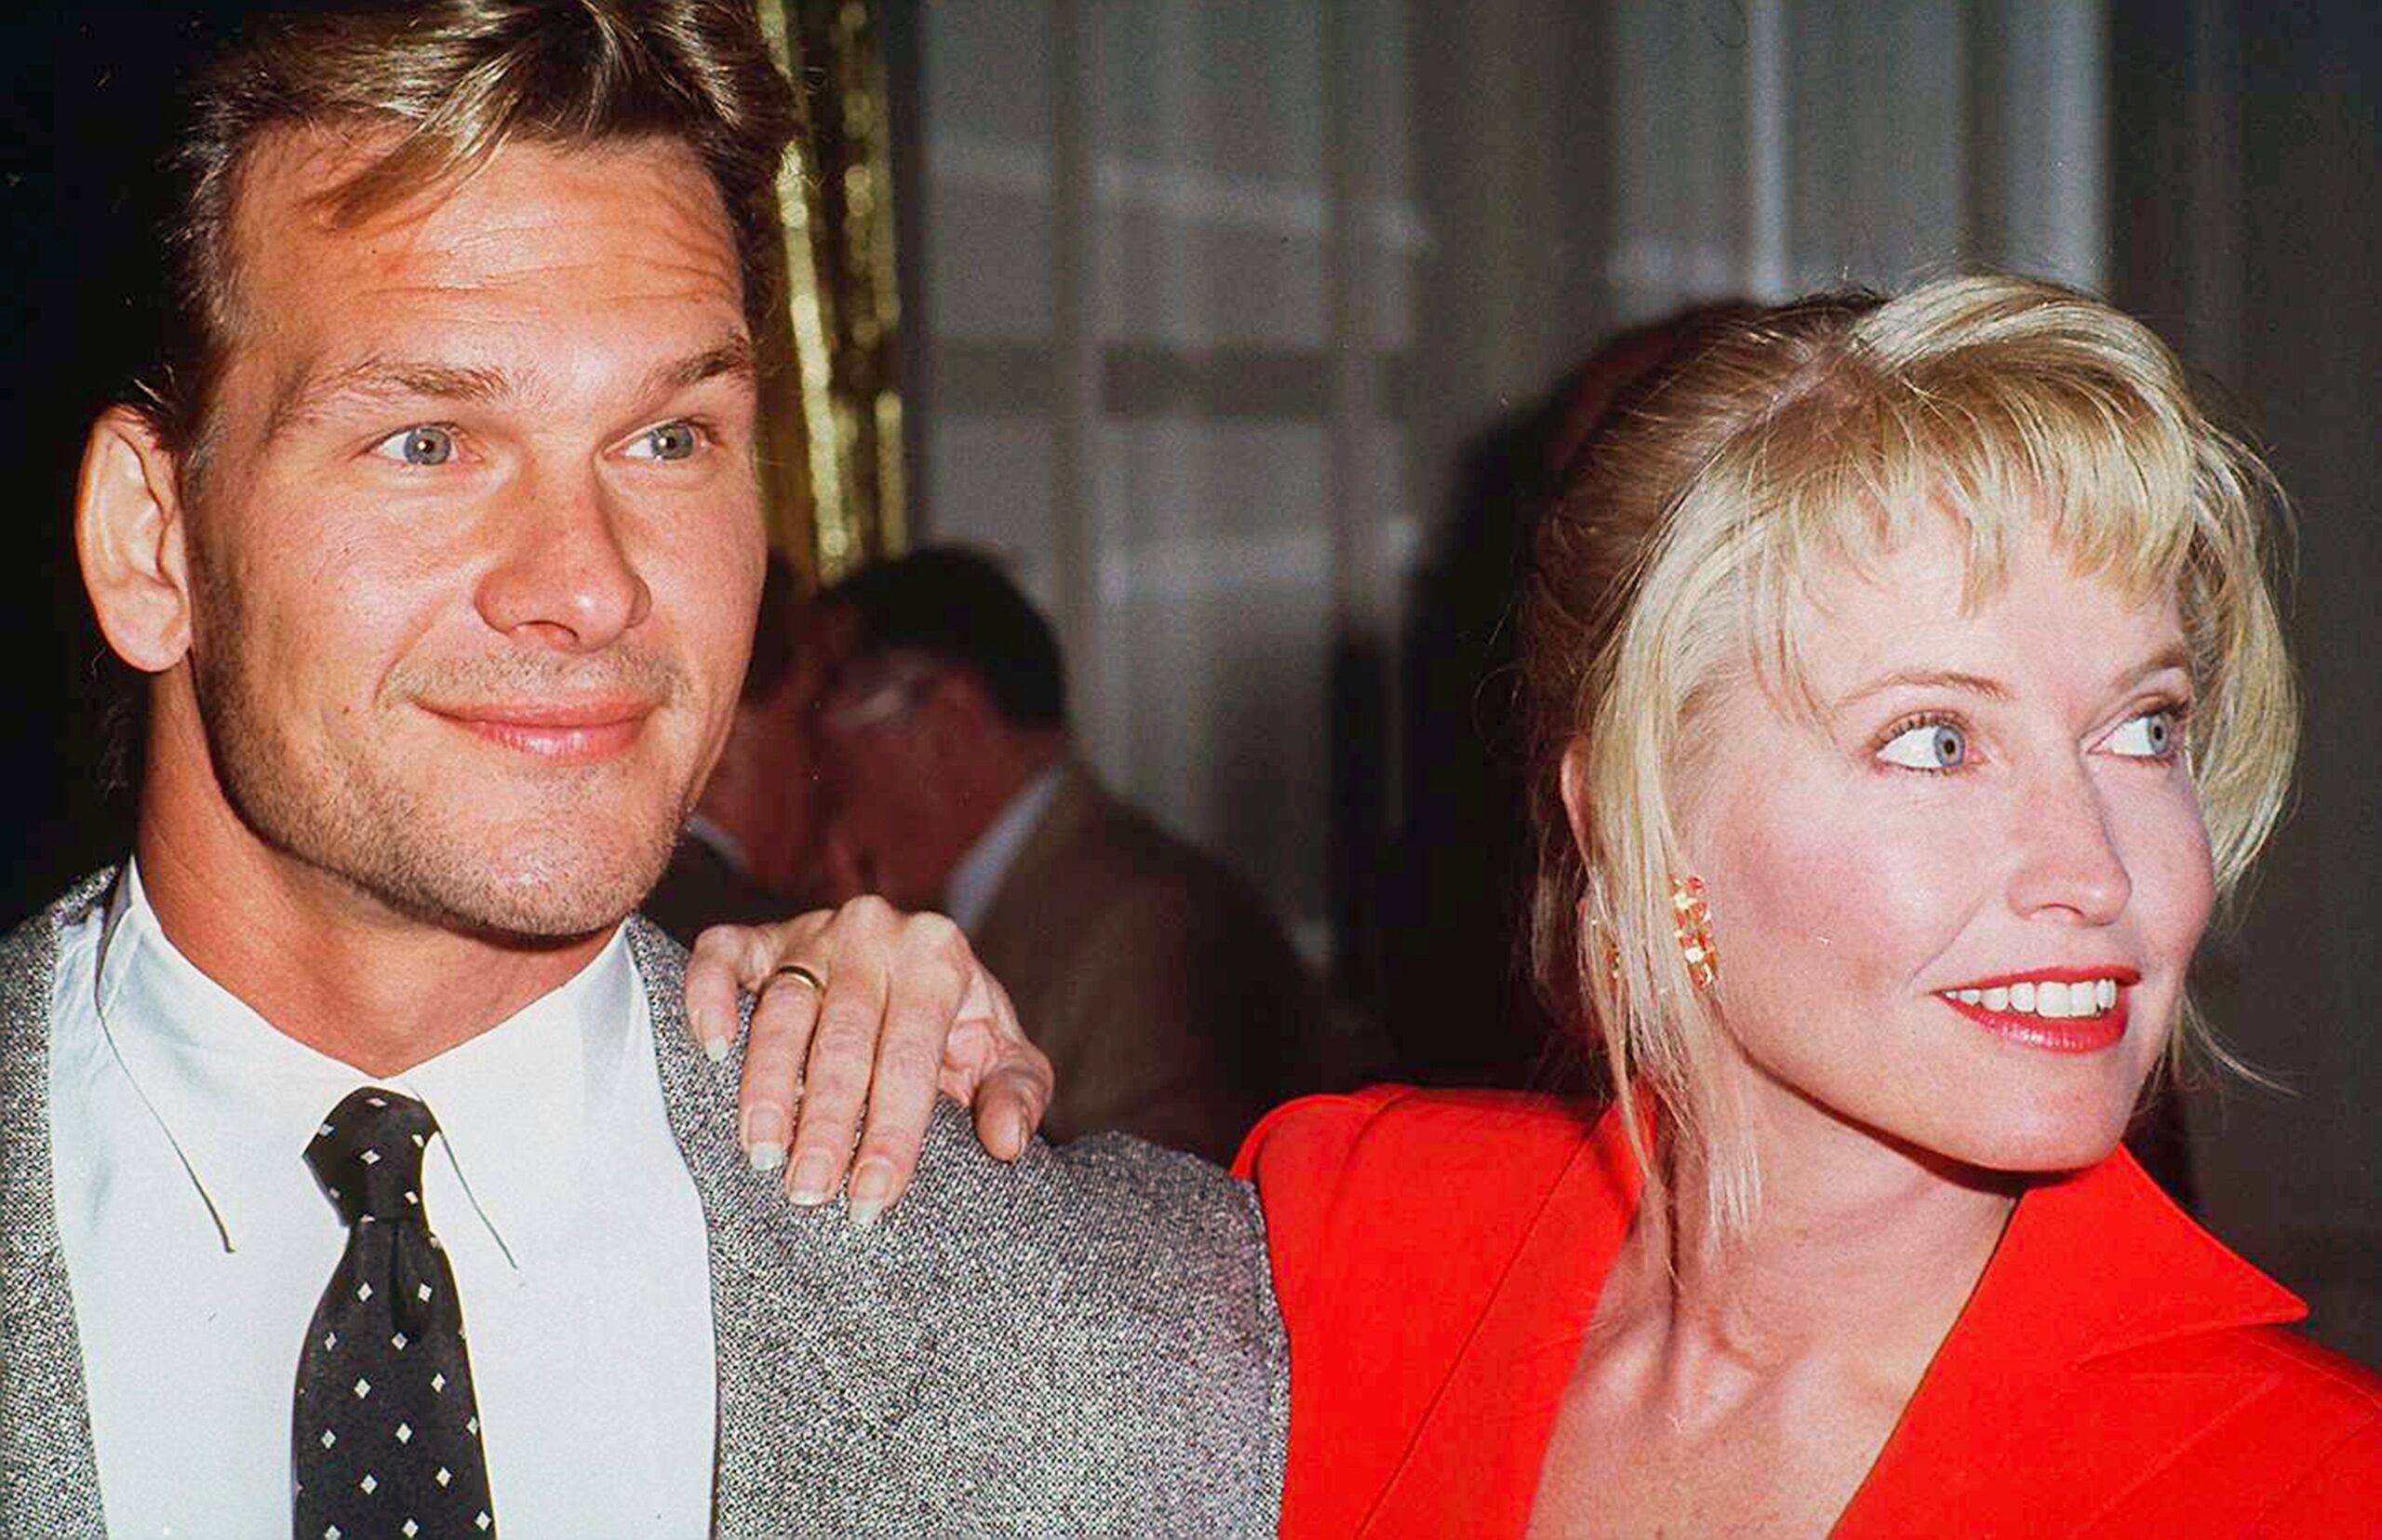 American actor and dancer Patrick Swayze (1952 - 2009) with his wife Lisa Niemi, circa 1992 | Source: Getty Images